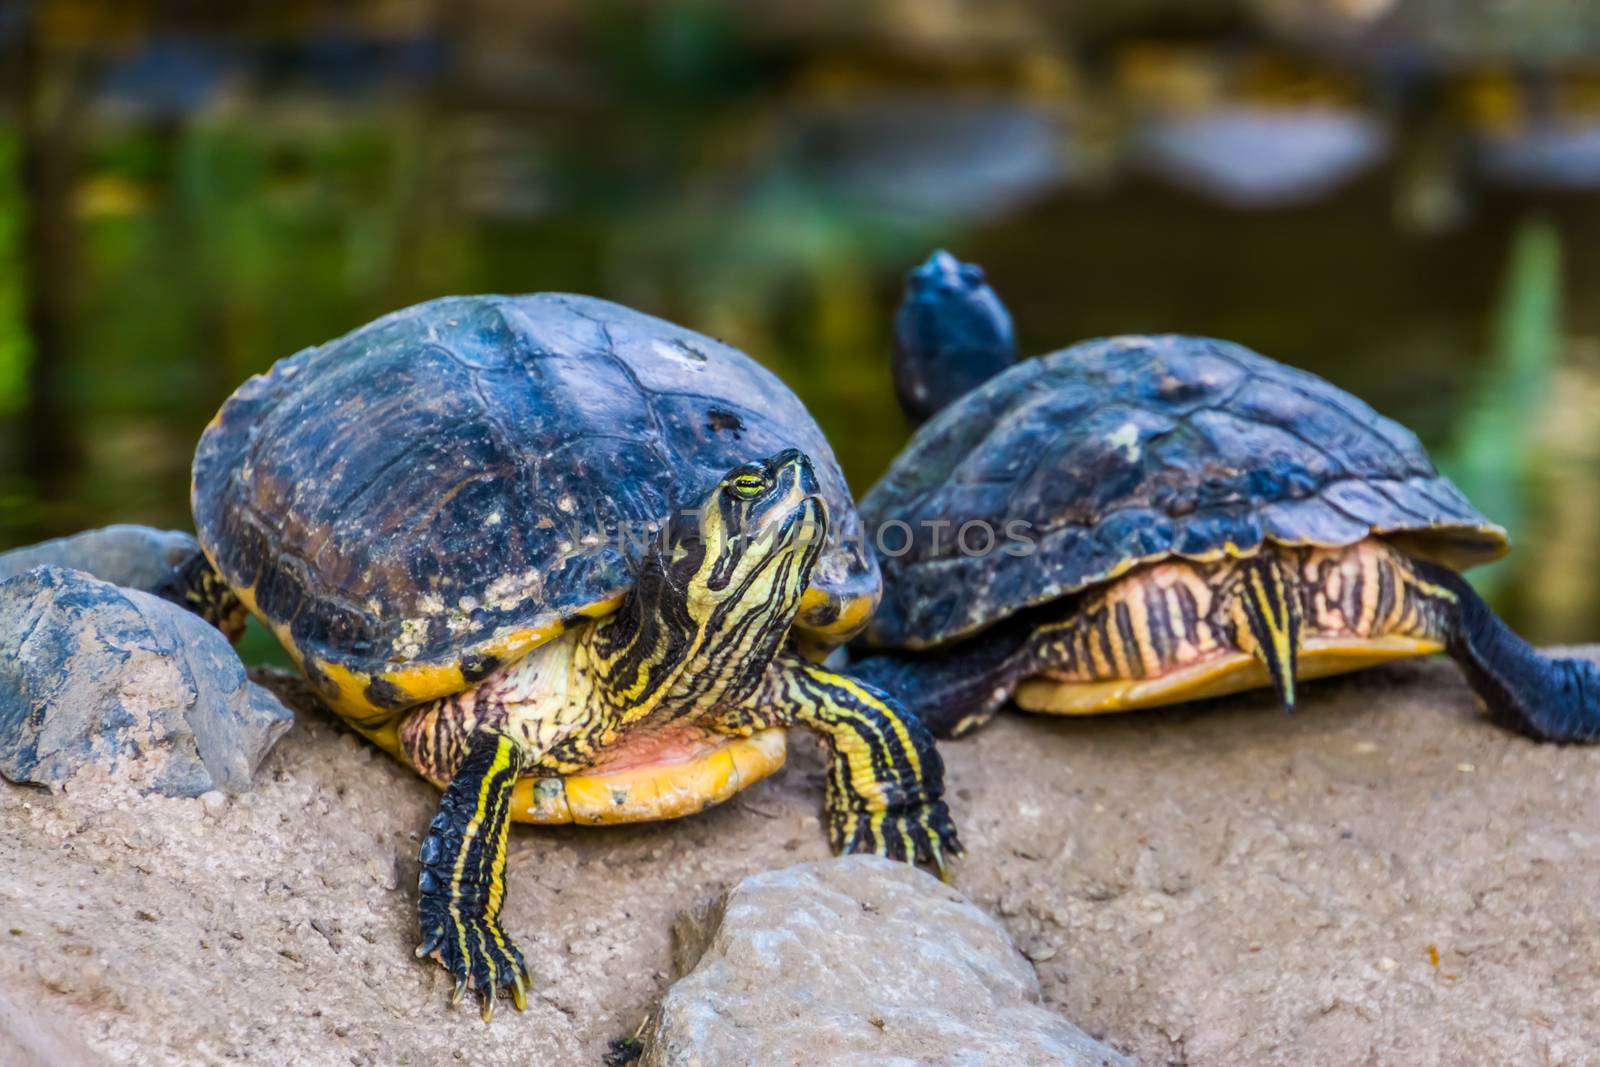 couple of yellow bellied cumberland slider turtles at the shore, front and rear view, tropical reptile specie from America by charlottebleijenberg